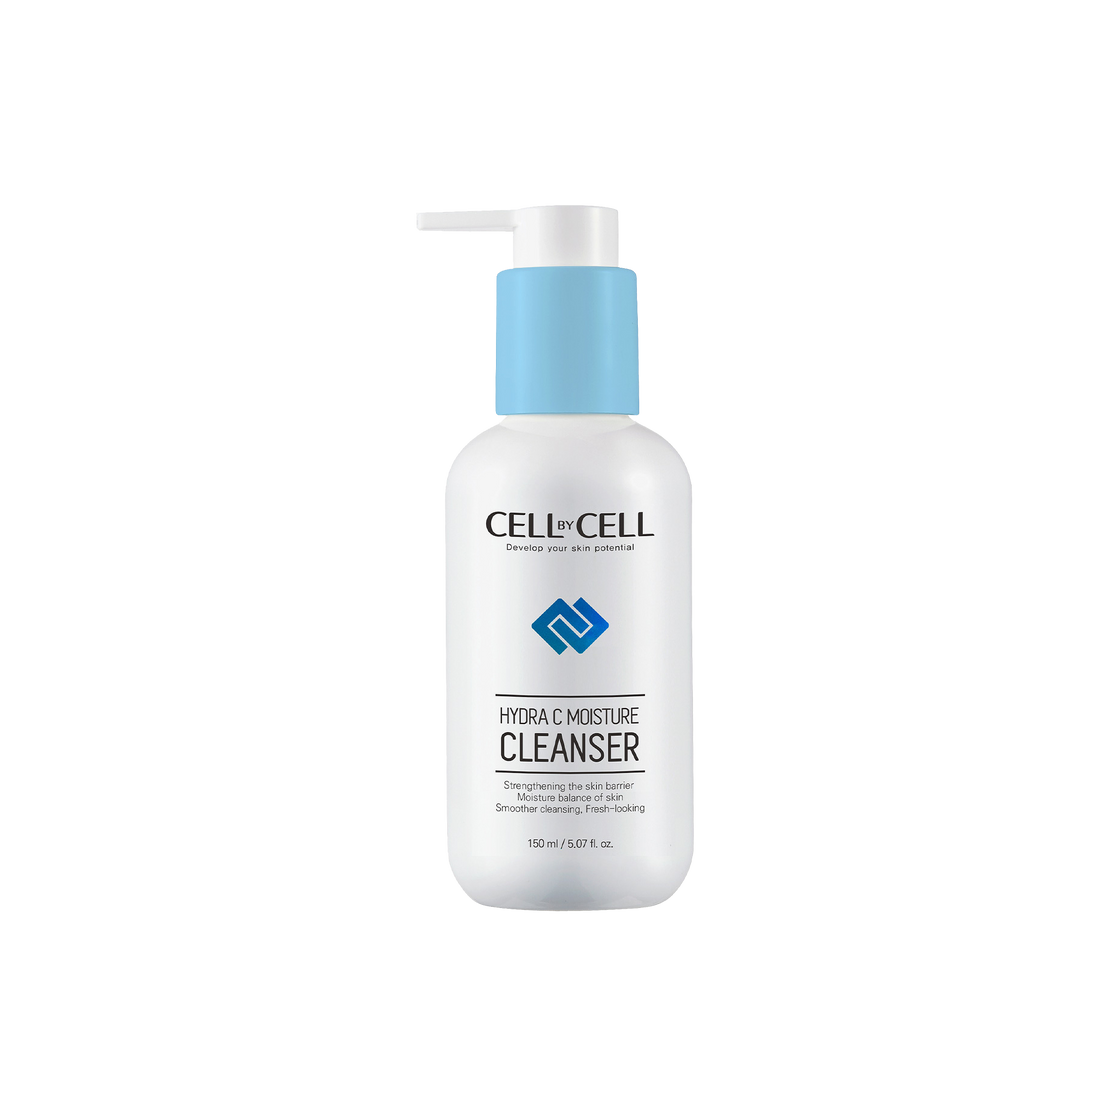 Products – Cell by Cell